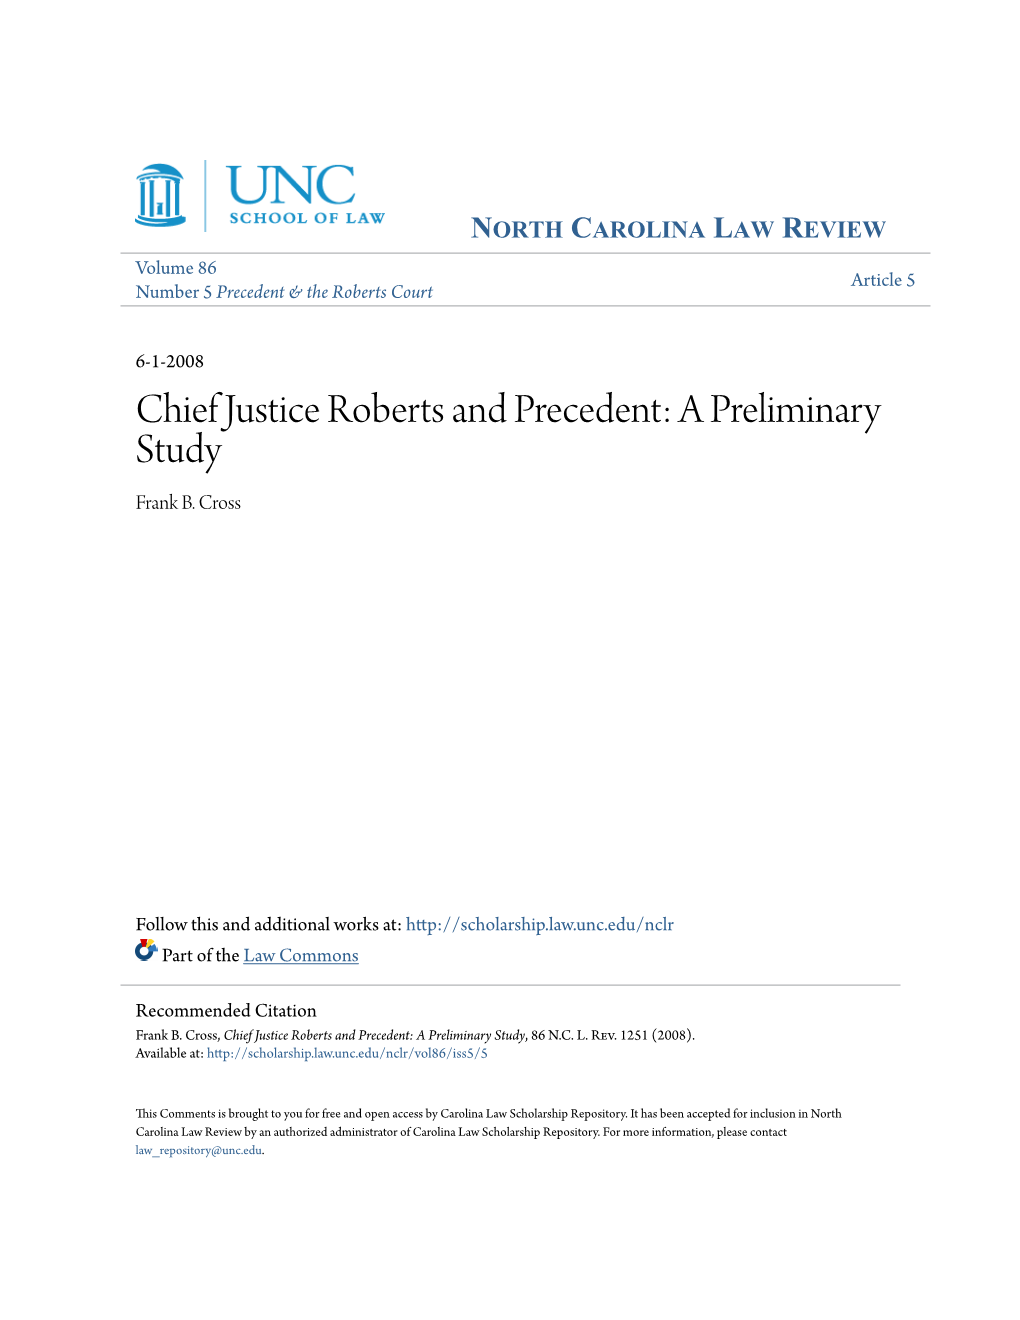 Chief Justice Roberts and Precedent: a Preliminary Study Frank B